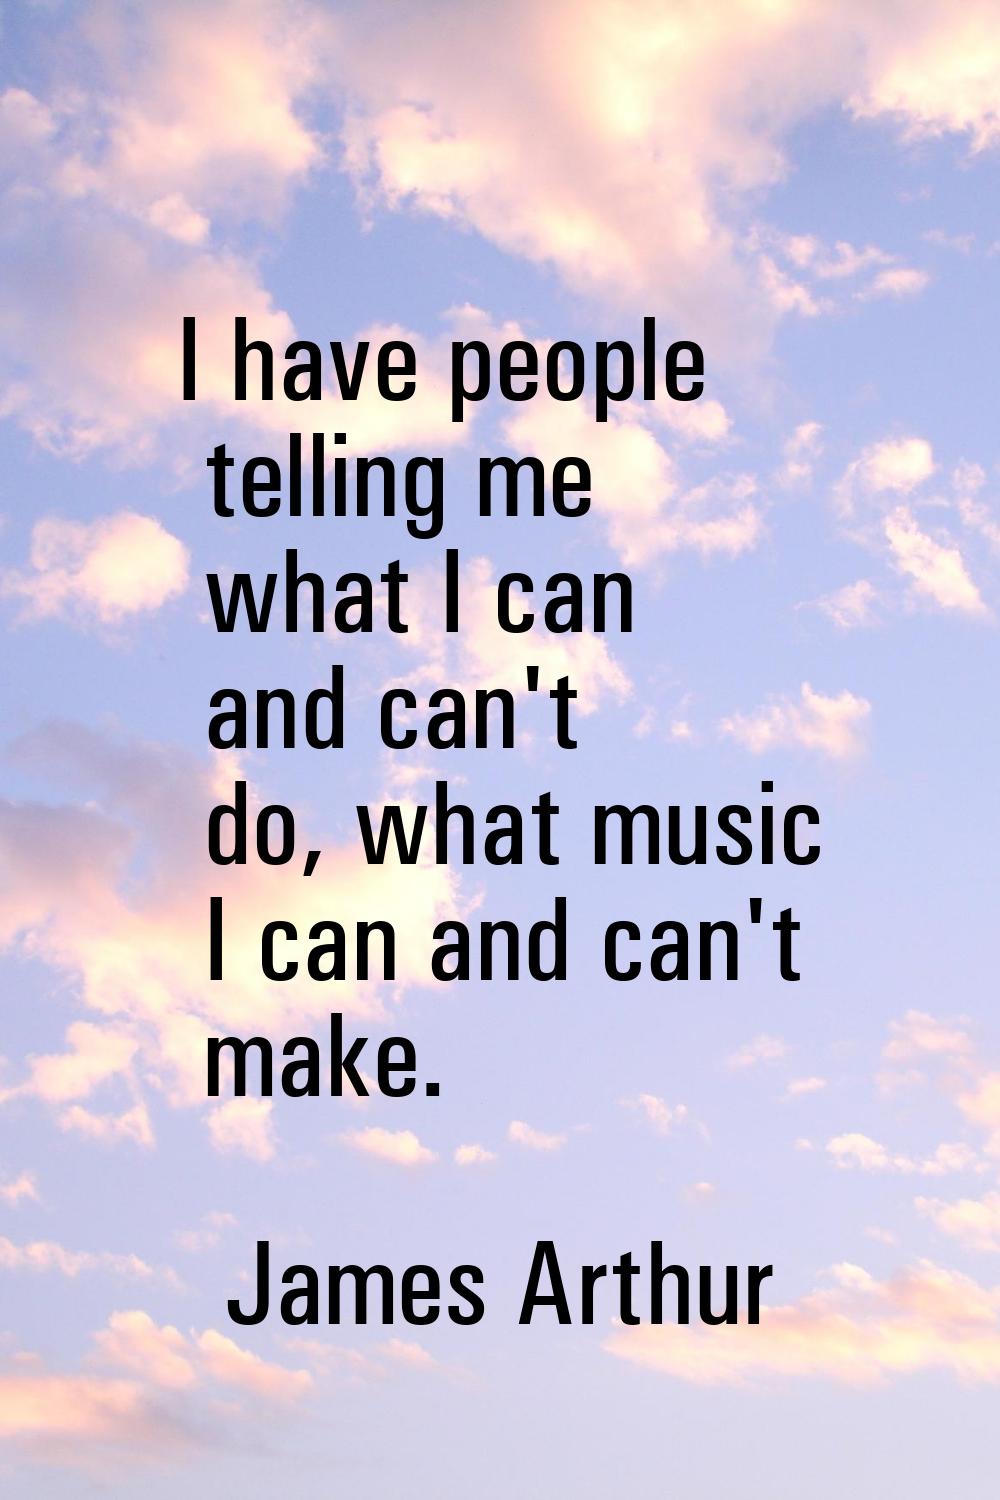 I have people telling me what I can and can't do, what music I can and can't make.